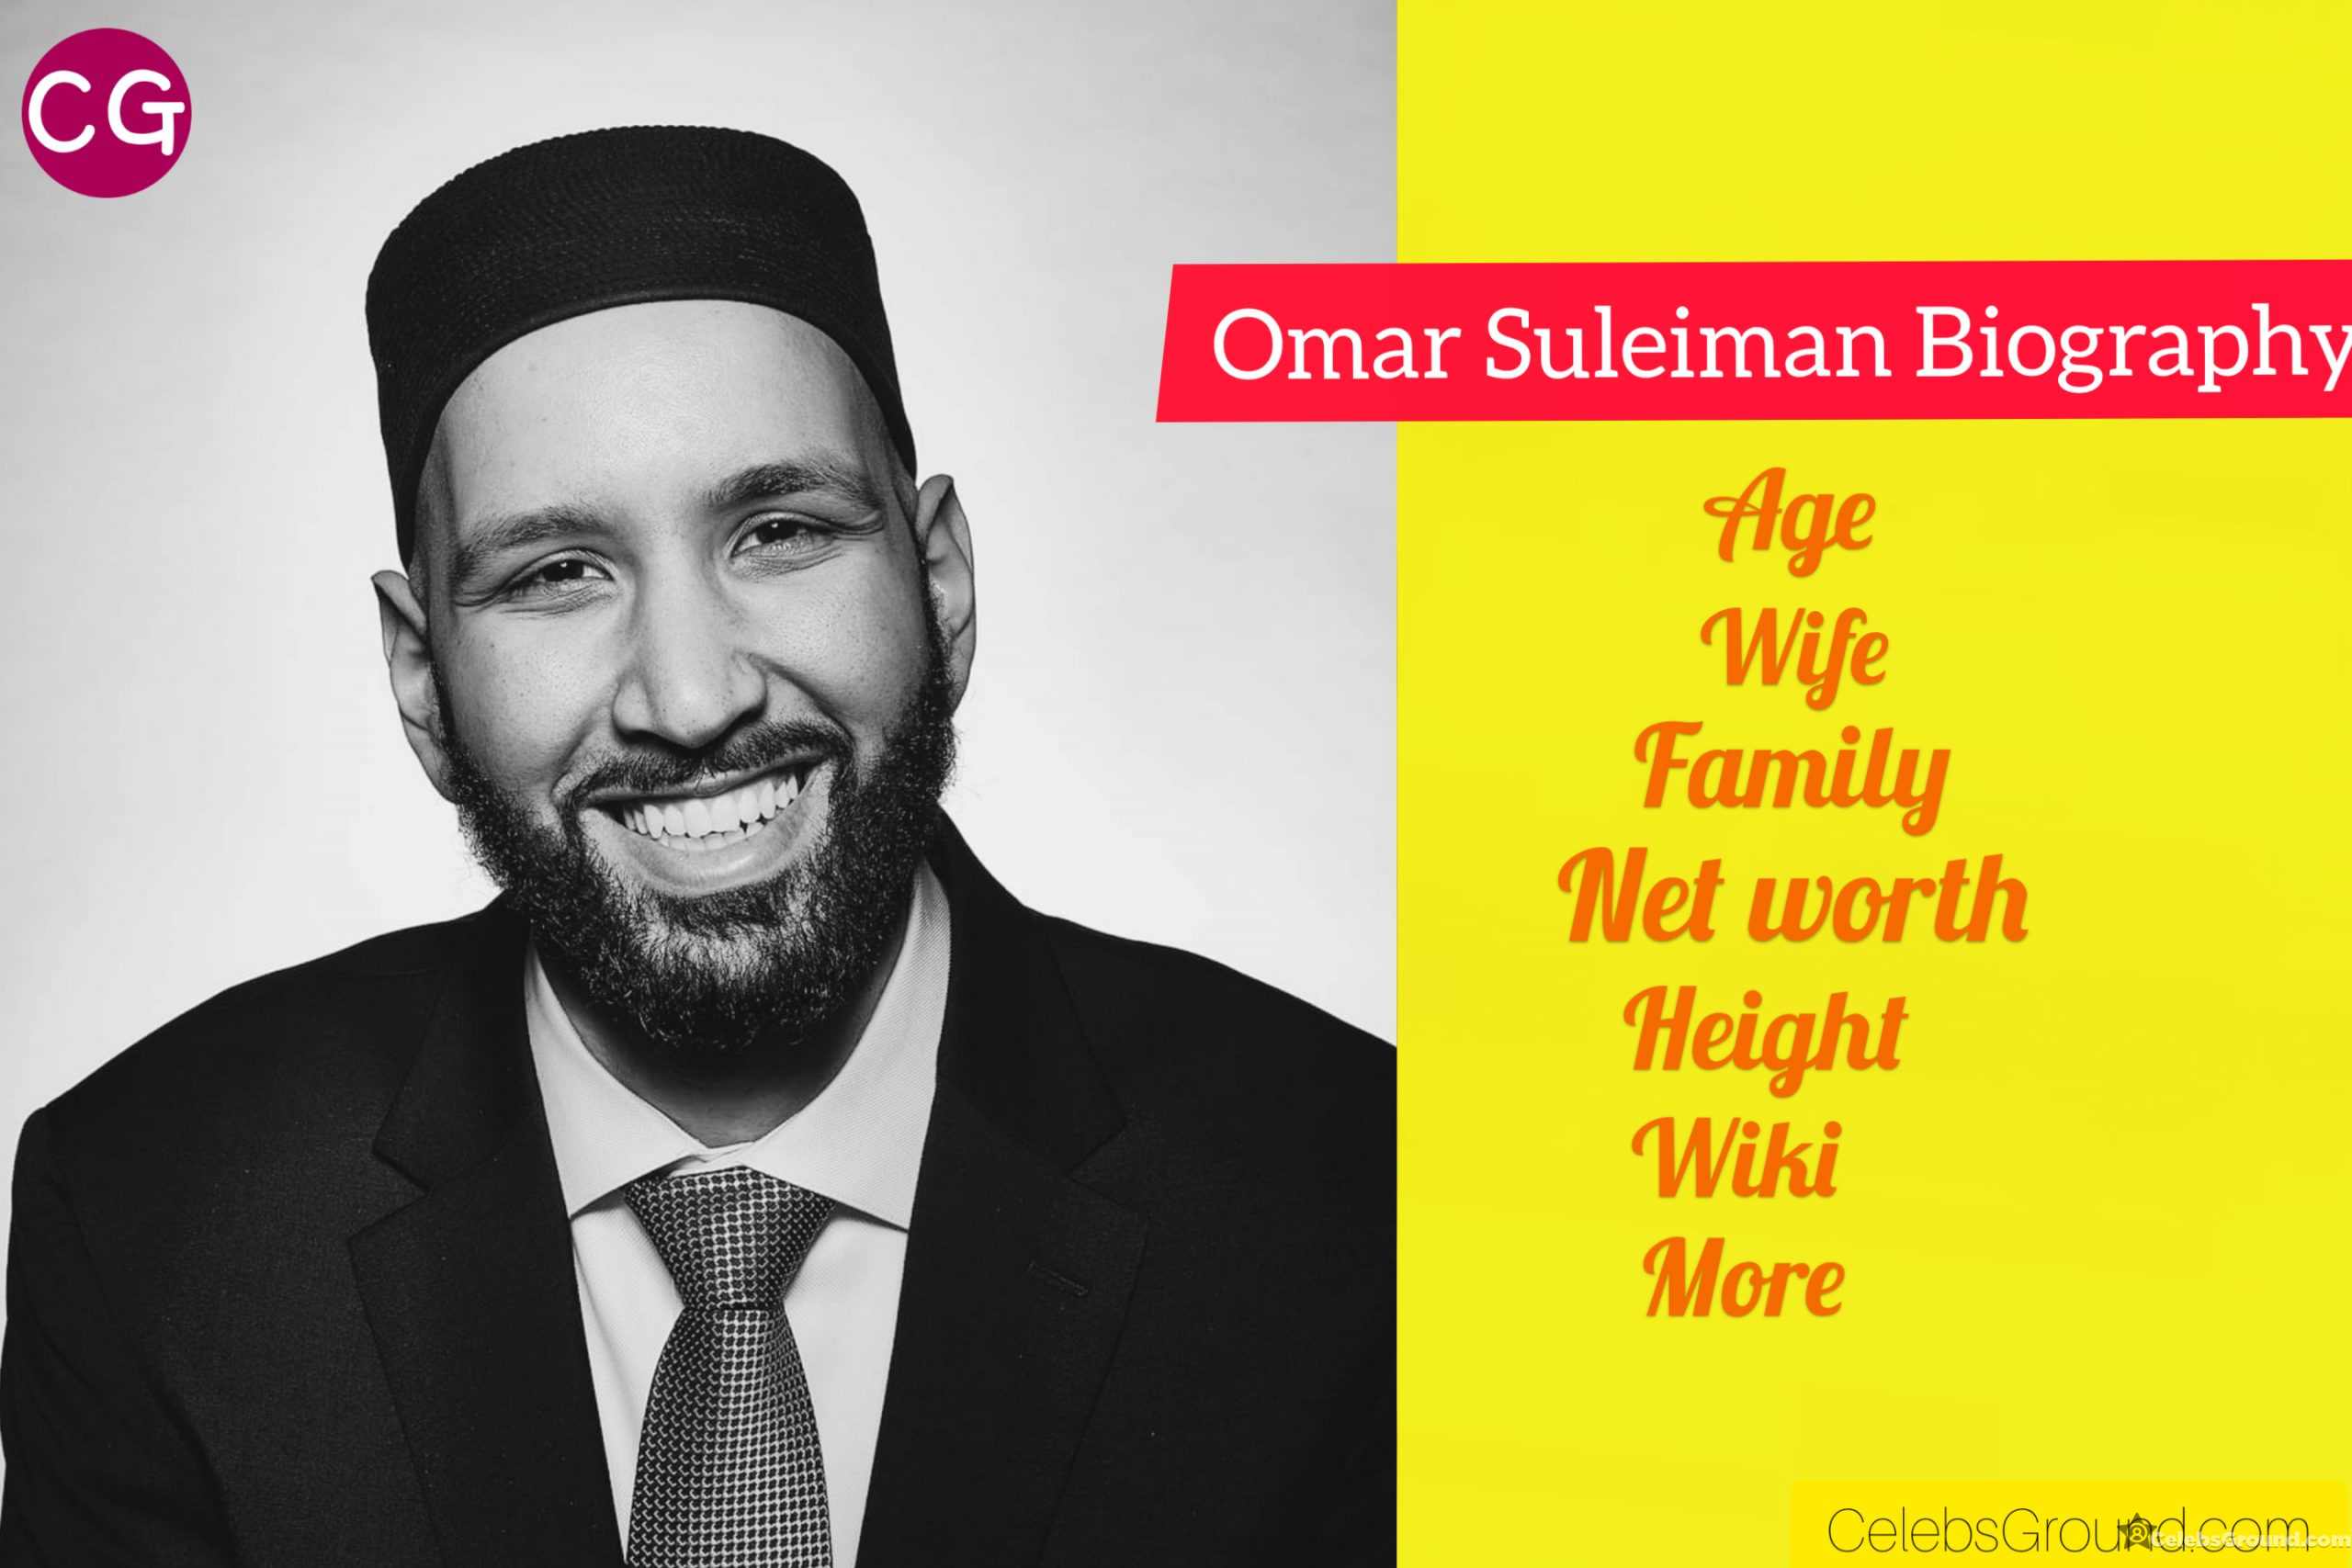 Omar Suleiman Biography Age, Wife, Family, Net Worth, Height, Wiki And